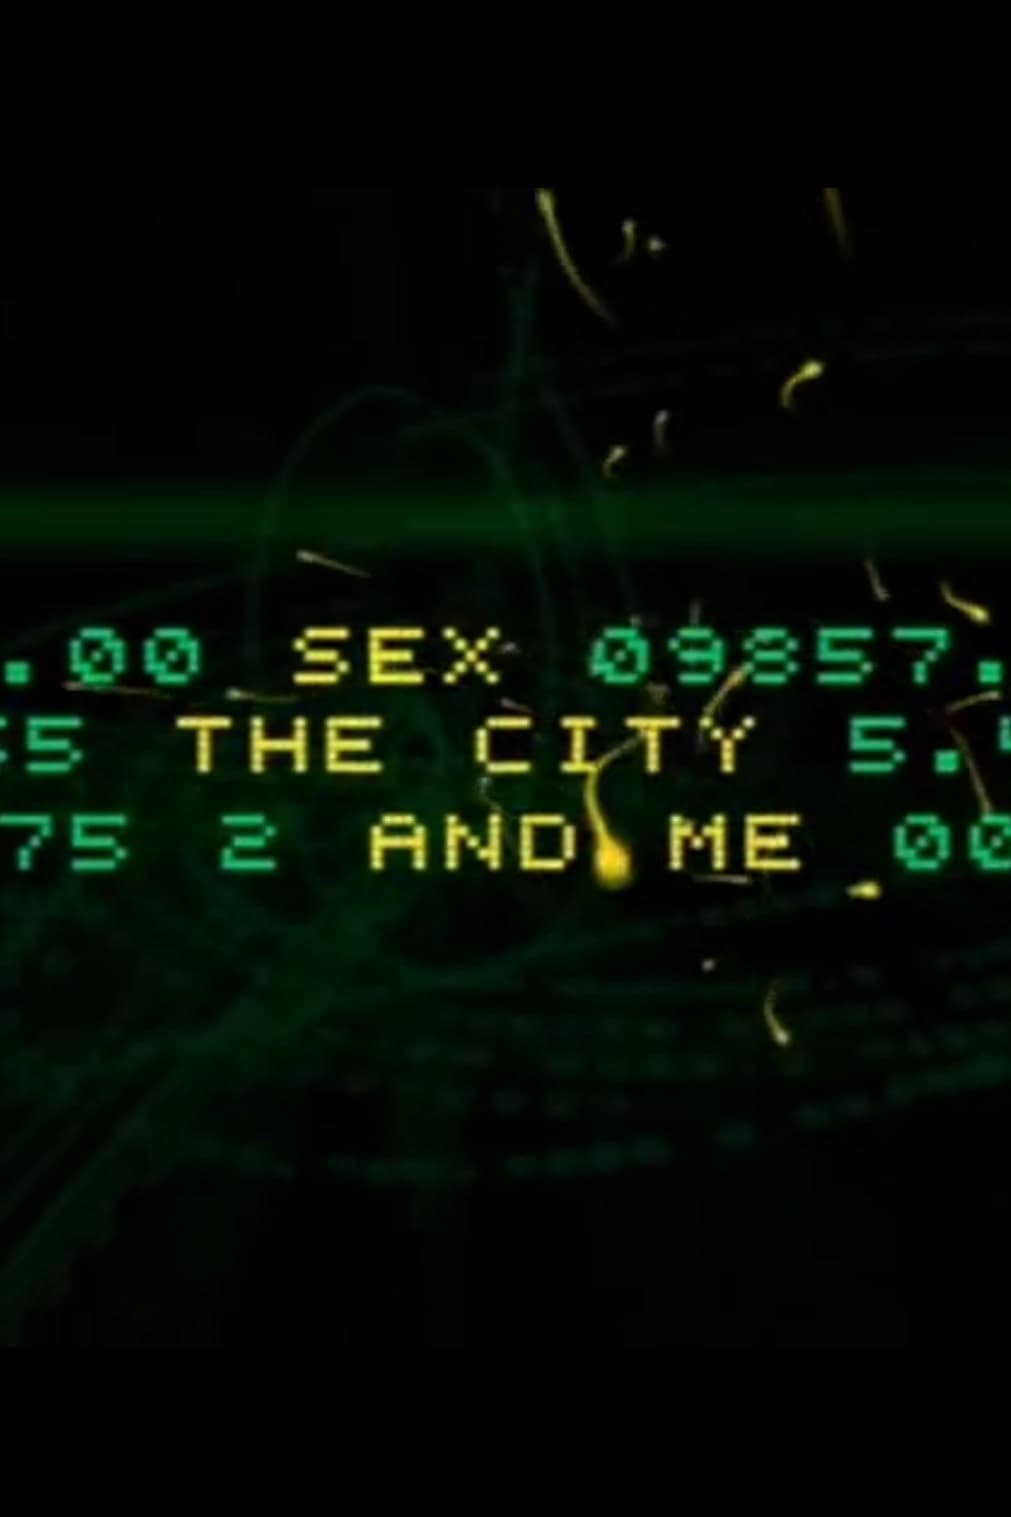 Sex, the City and Me